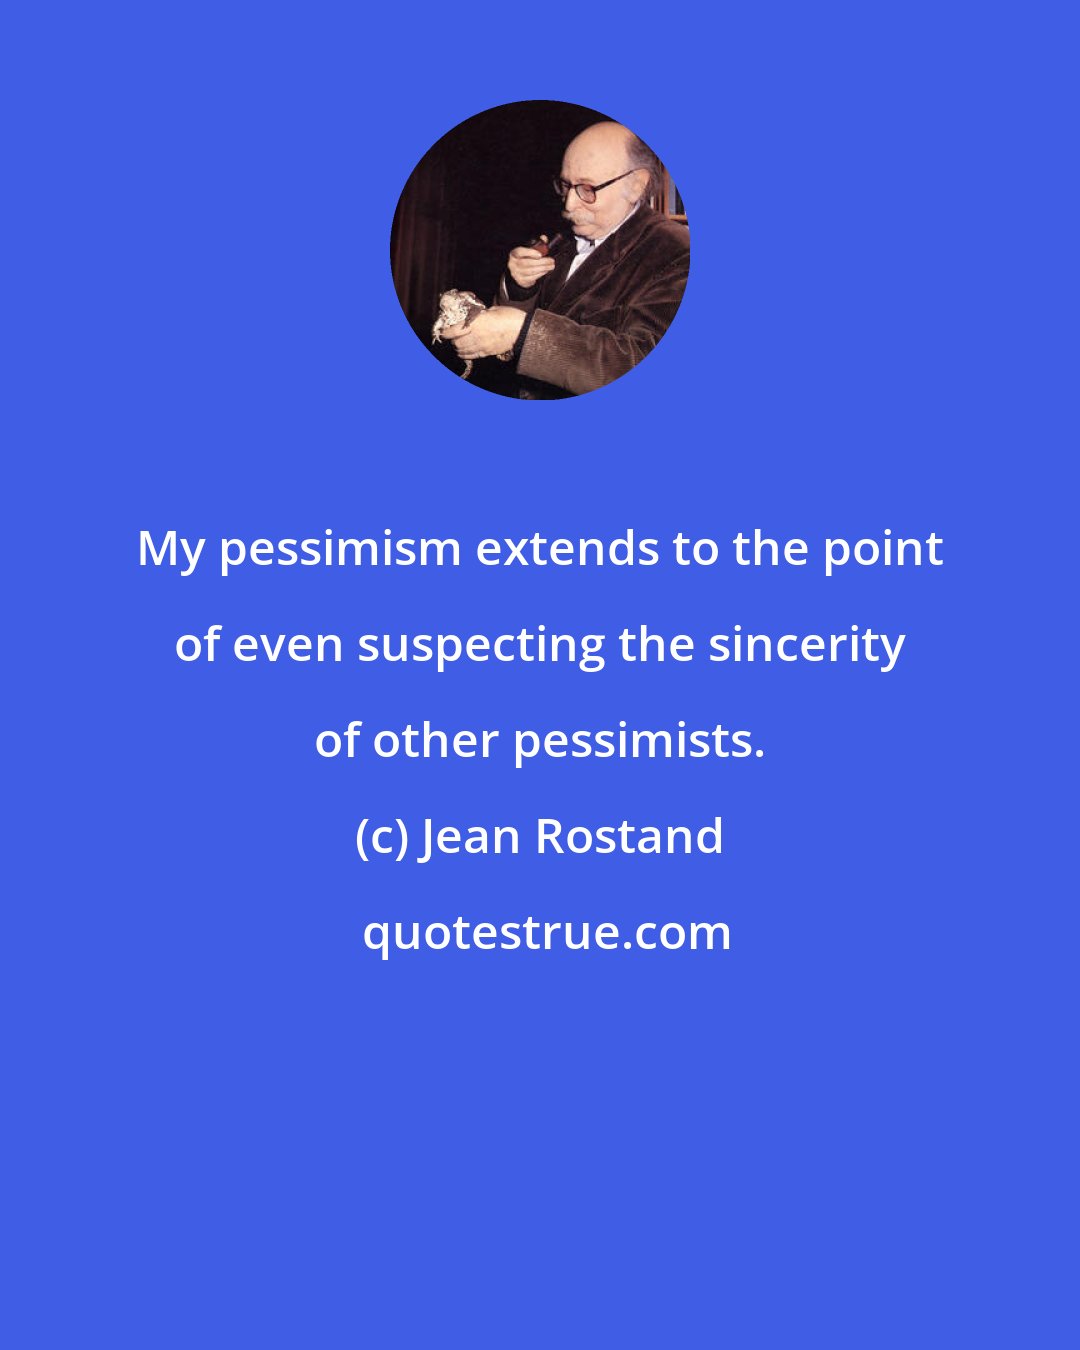 Jean Rostand: My pessimism extends to the point of even suspecting the sincerity of other pessimists.